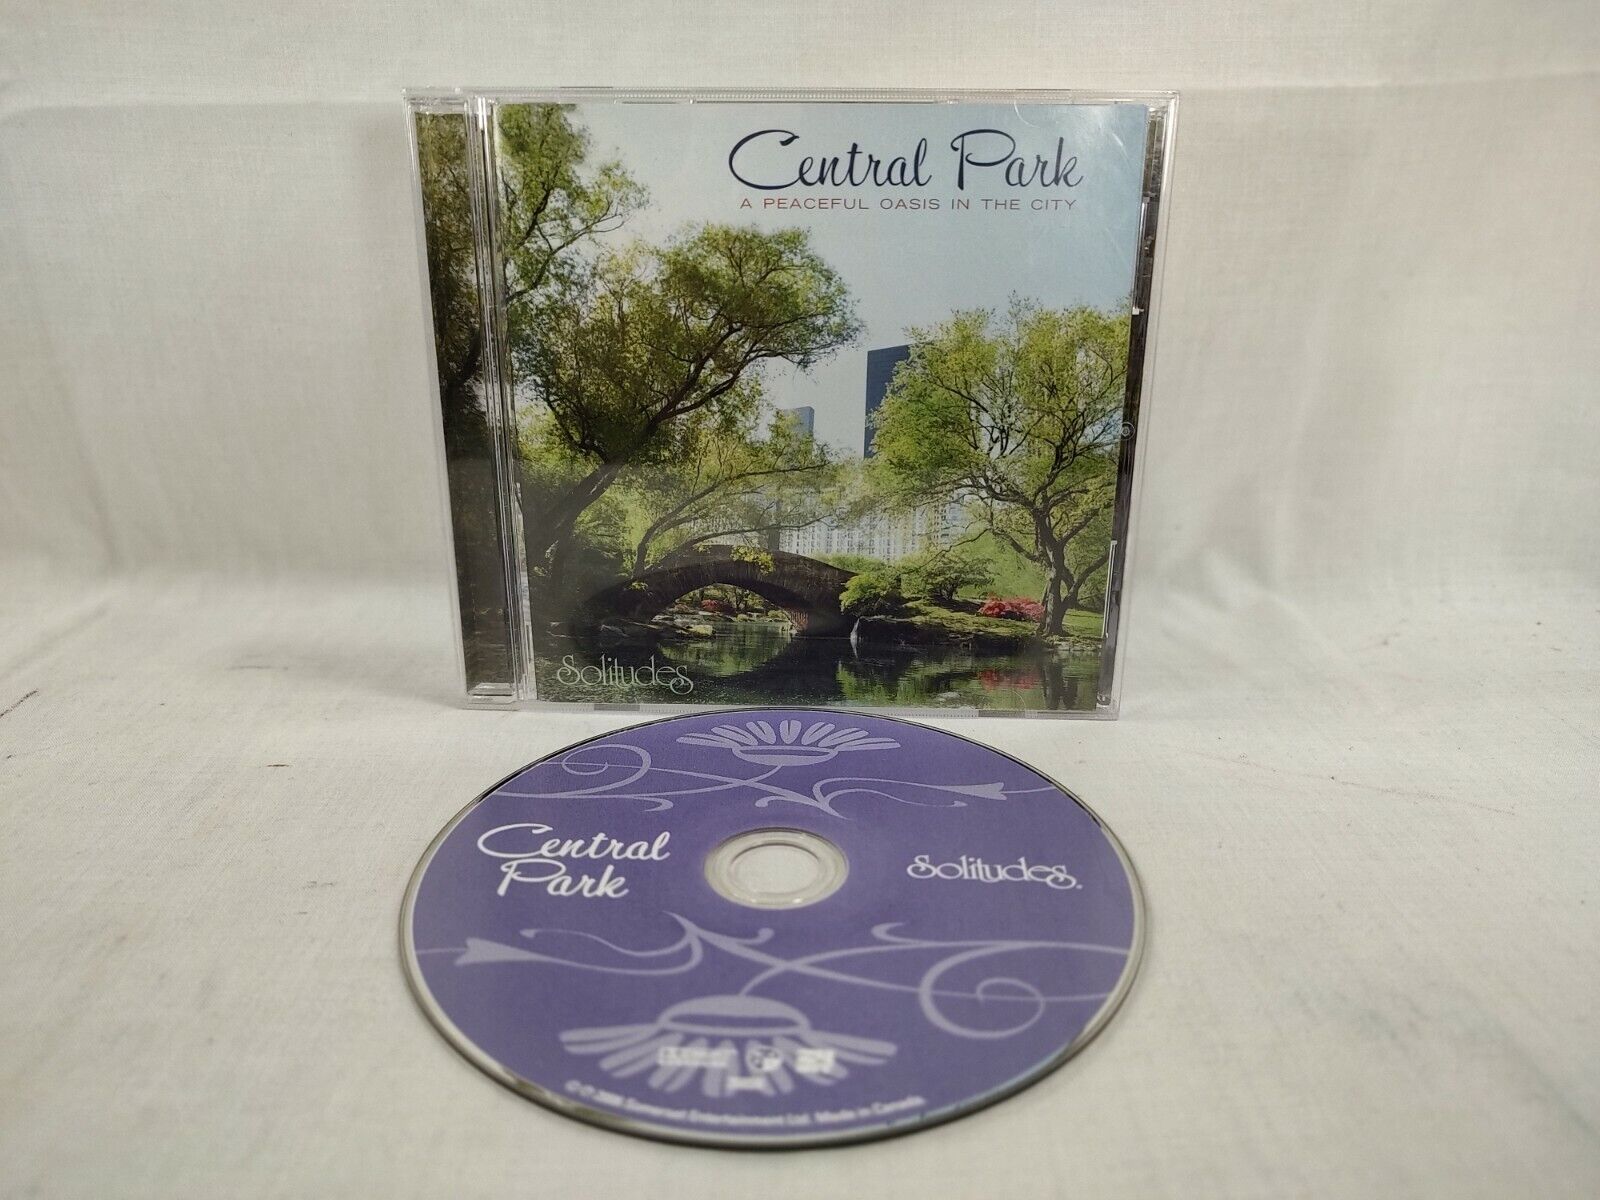 Solitudes Dan Gibson Central Park A Peaceful Oasis In The City New York CD